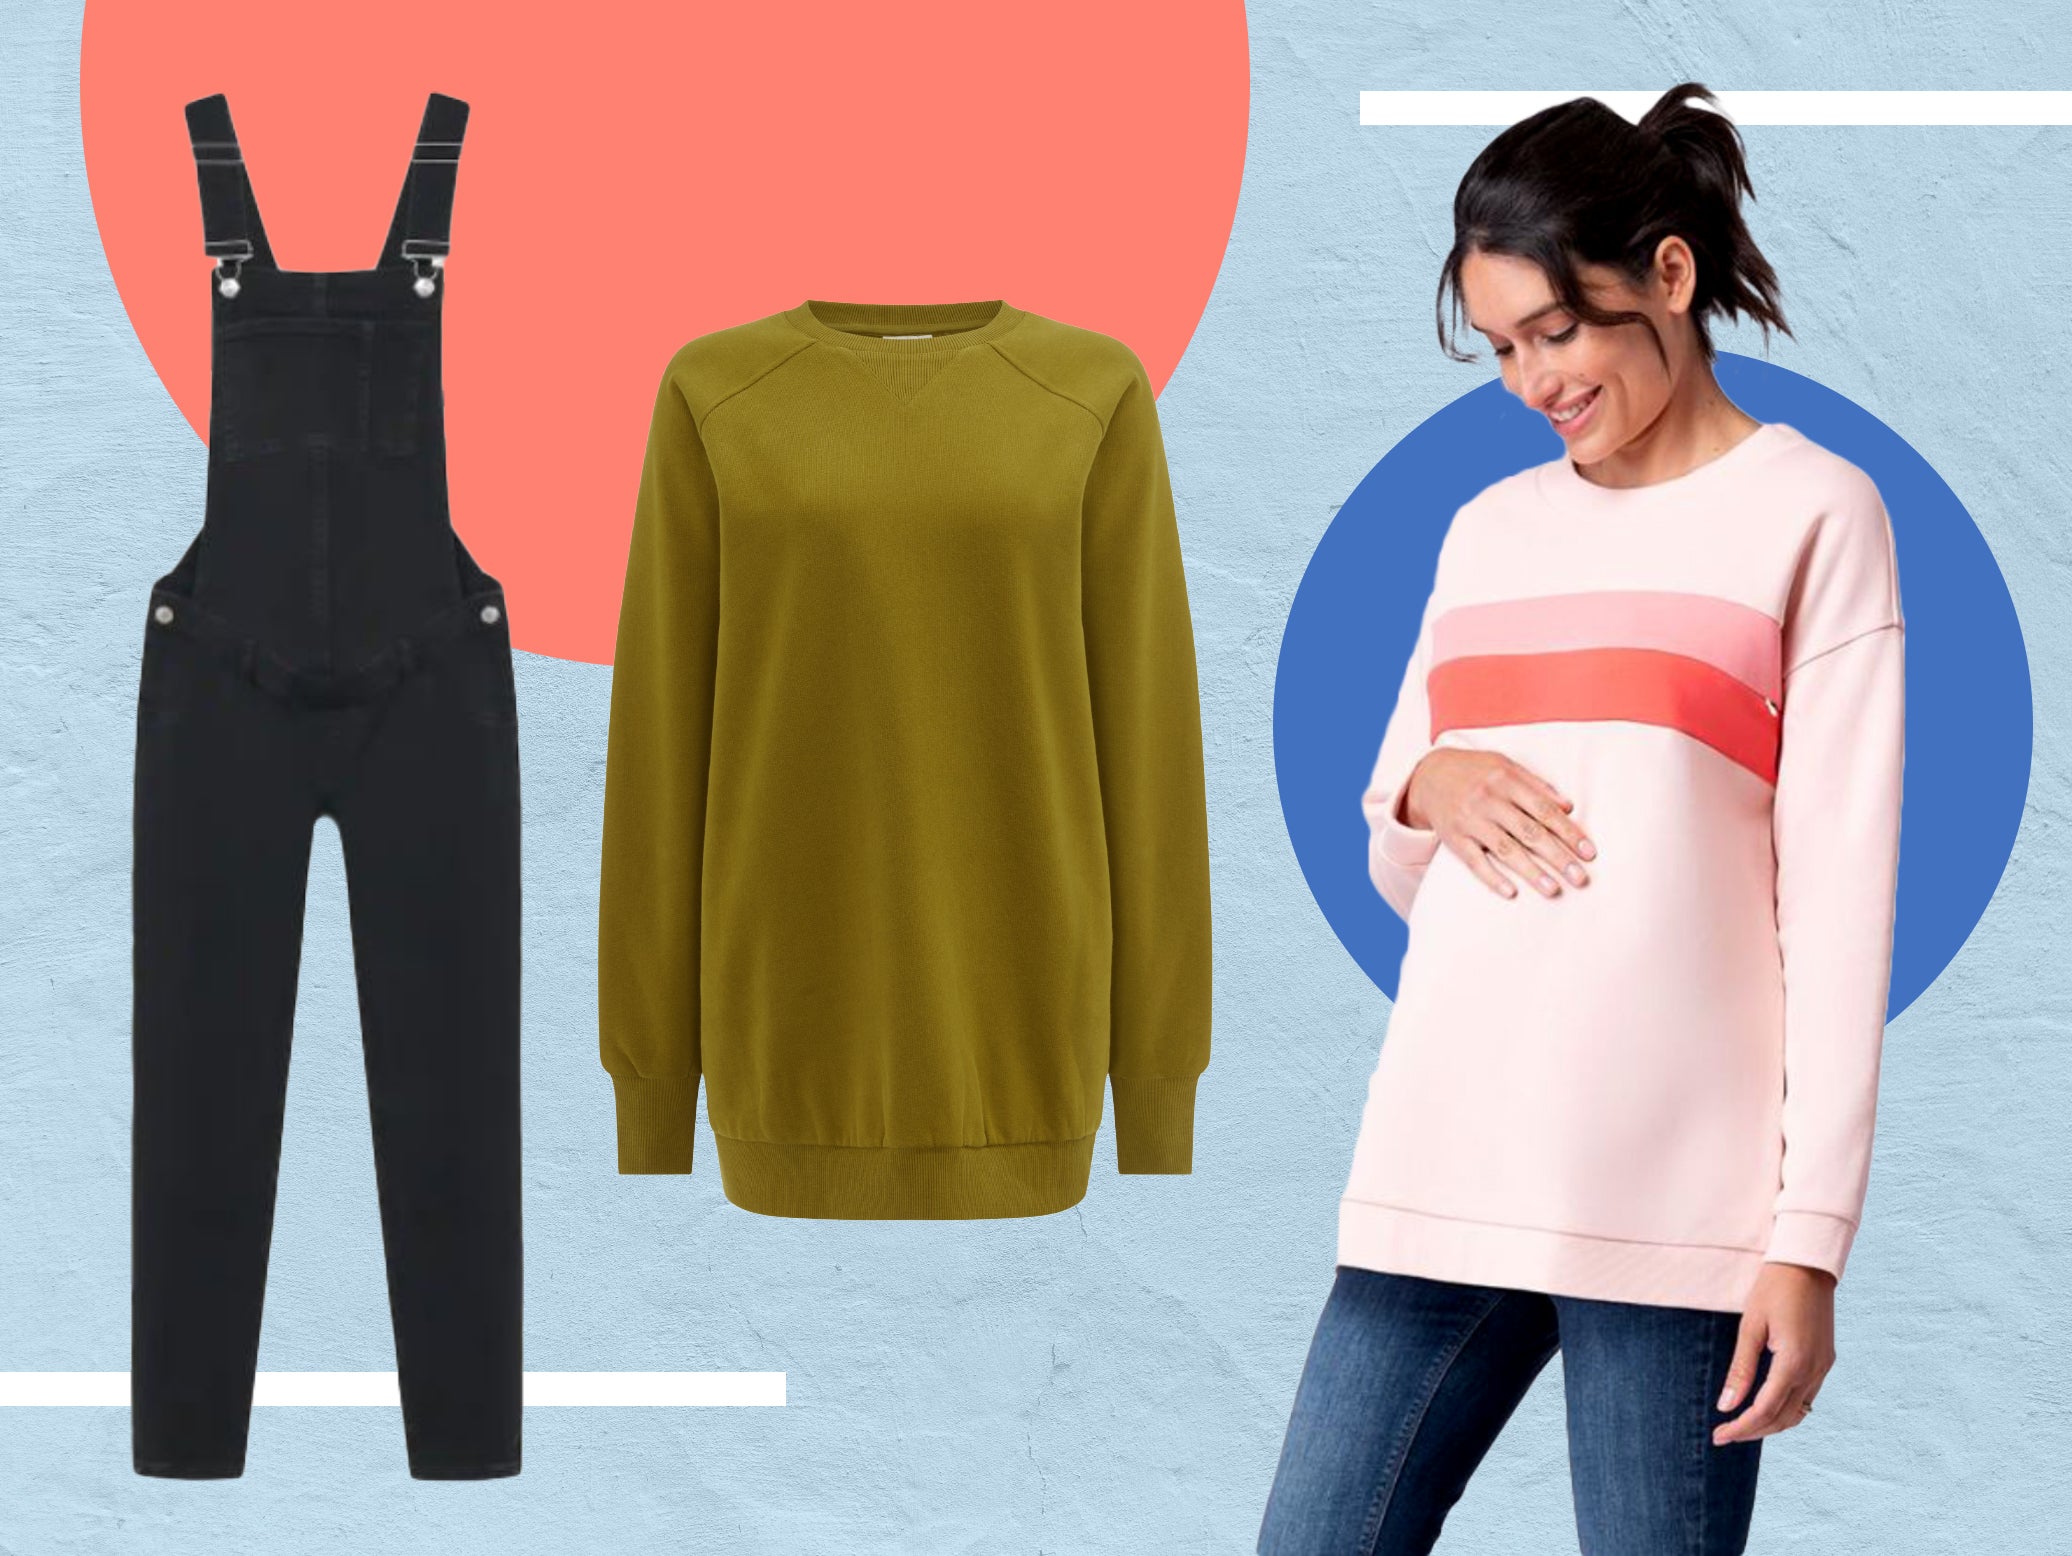 We sifted through maternity collections to help you breathe new life into your pregnancy wardrobe